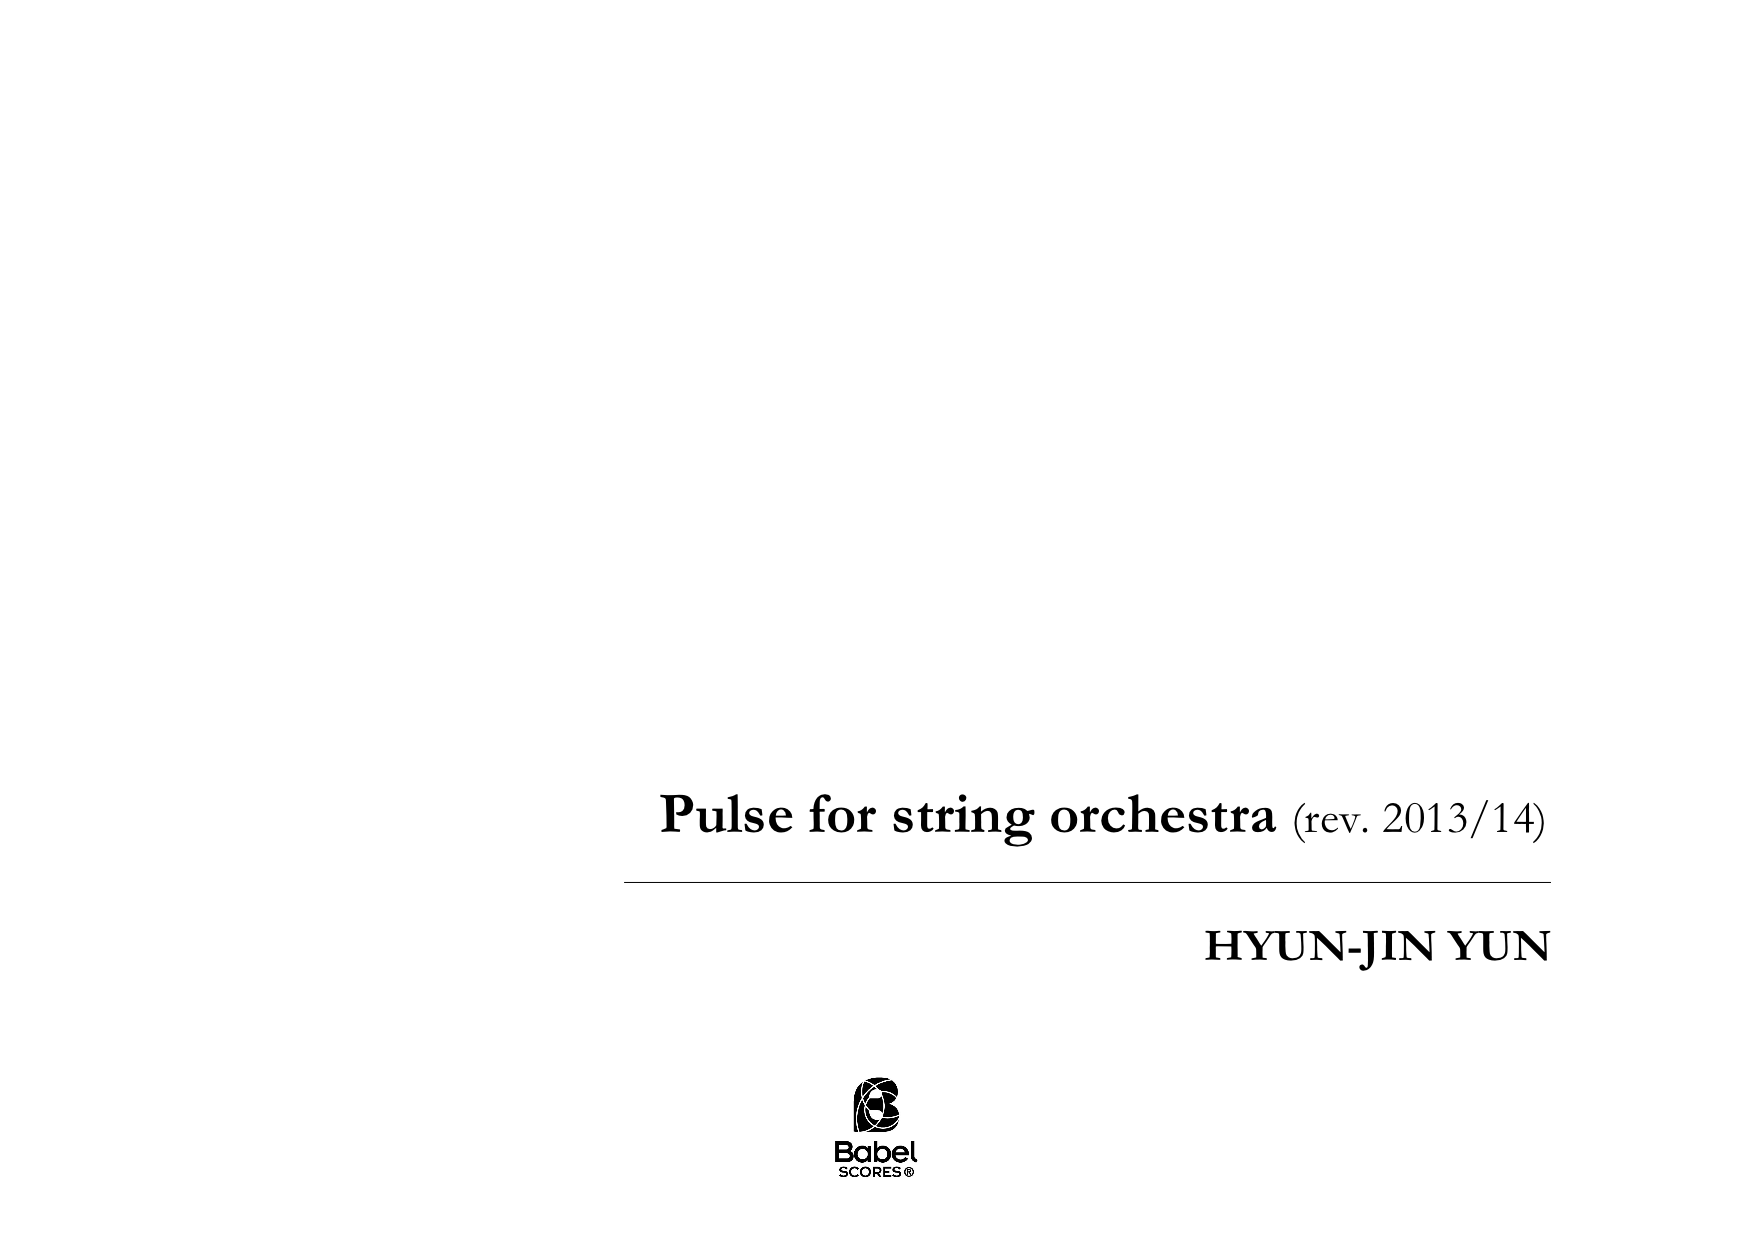 Pulse for String Orchestra A4 z 3 1 479